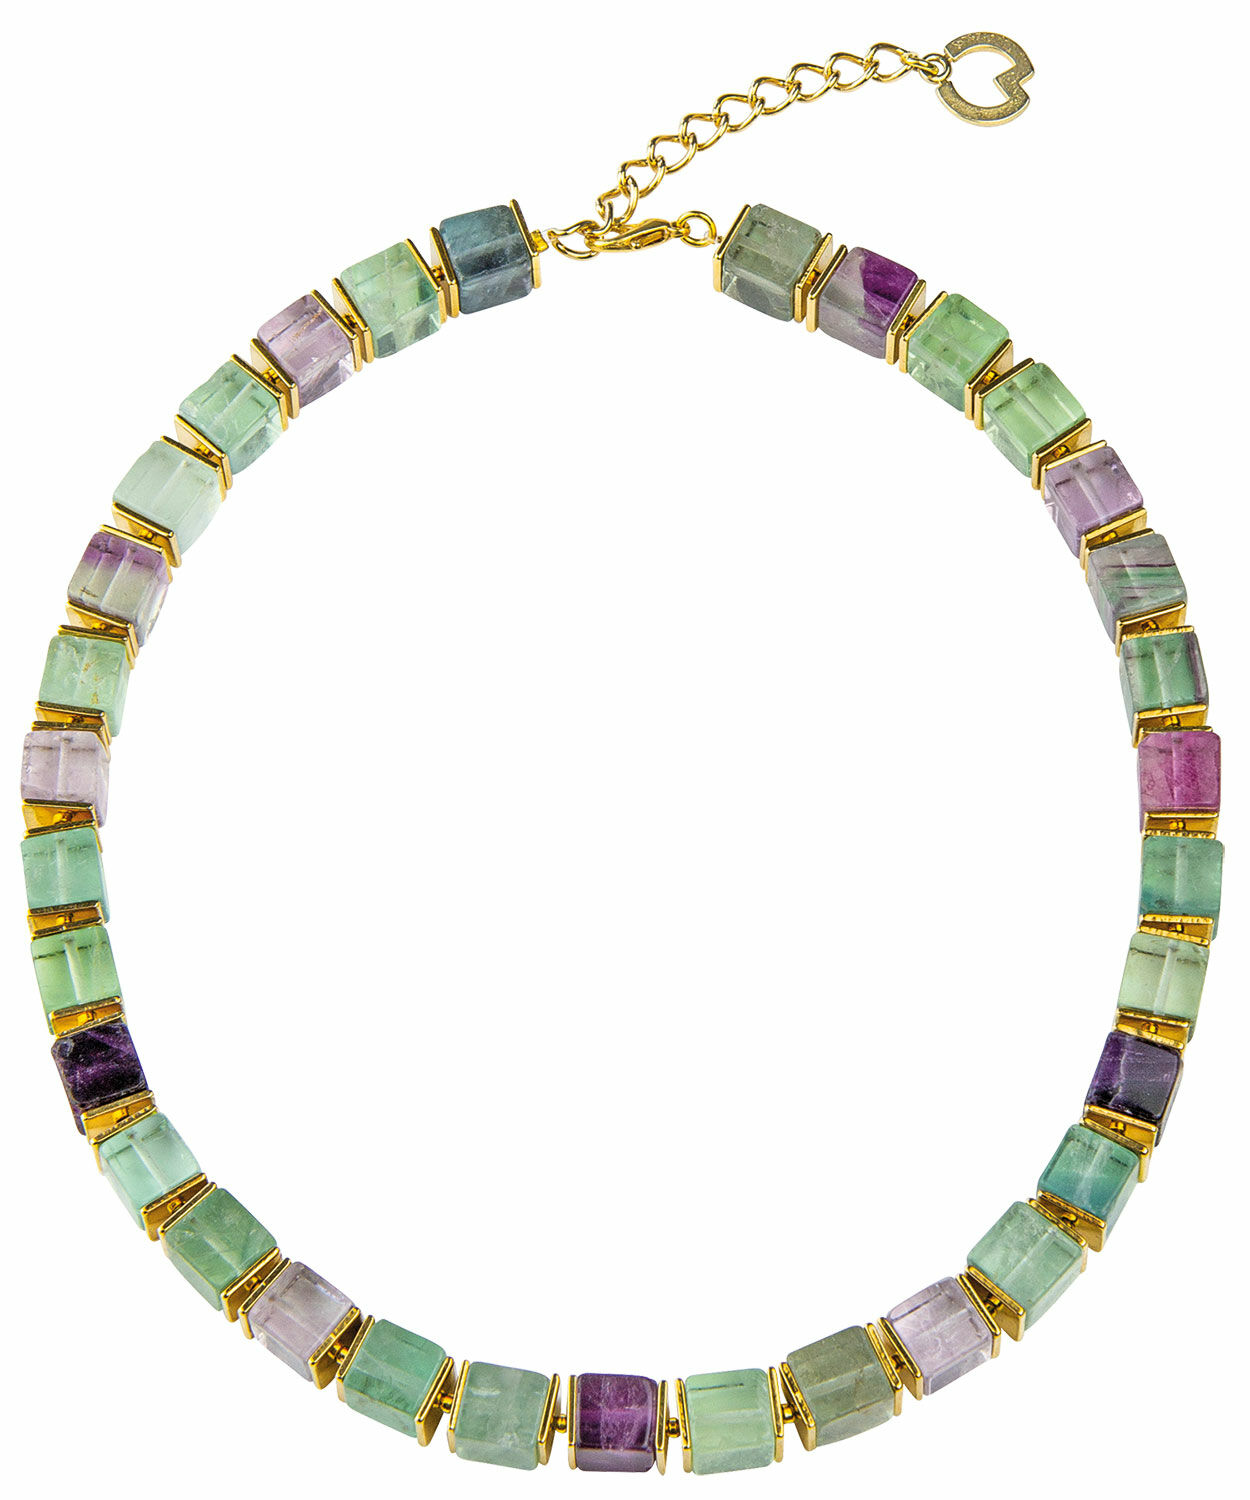 Necklace "Northern Lights" by Petra Waszak